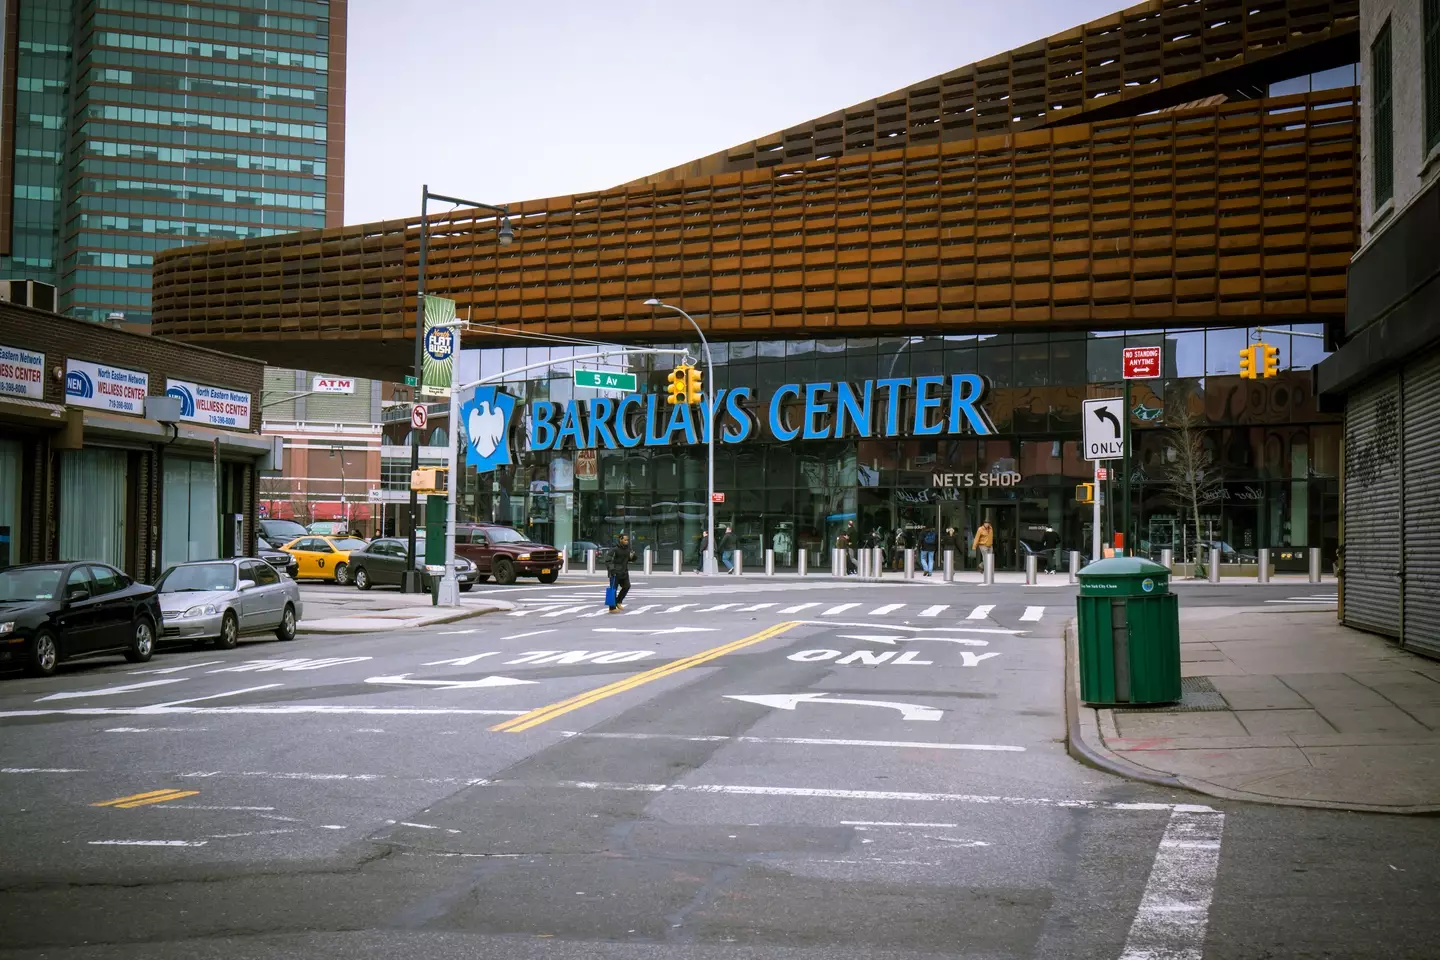 There were false rumours of an active shooter at the Barclays Center.